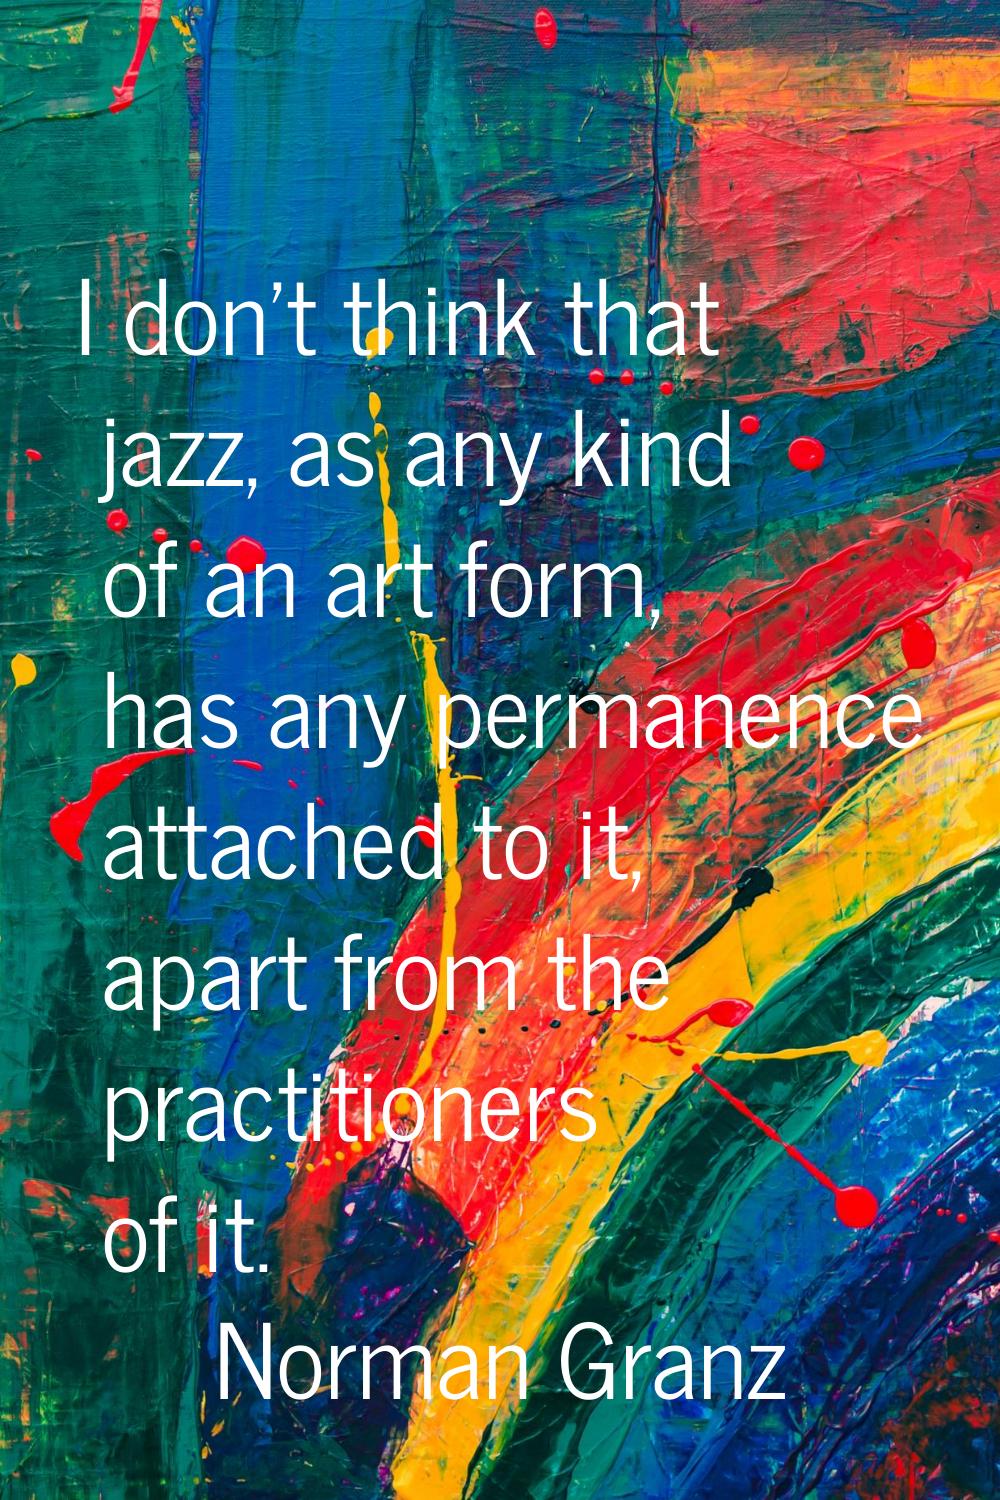 I don't think that jazz, as any kind of an art form, has any permanence attached to it, apart from 